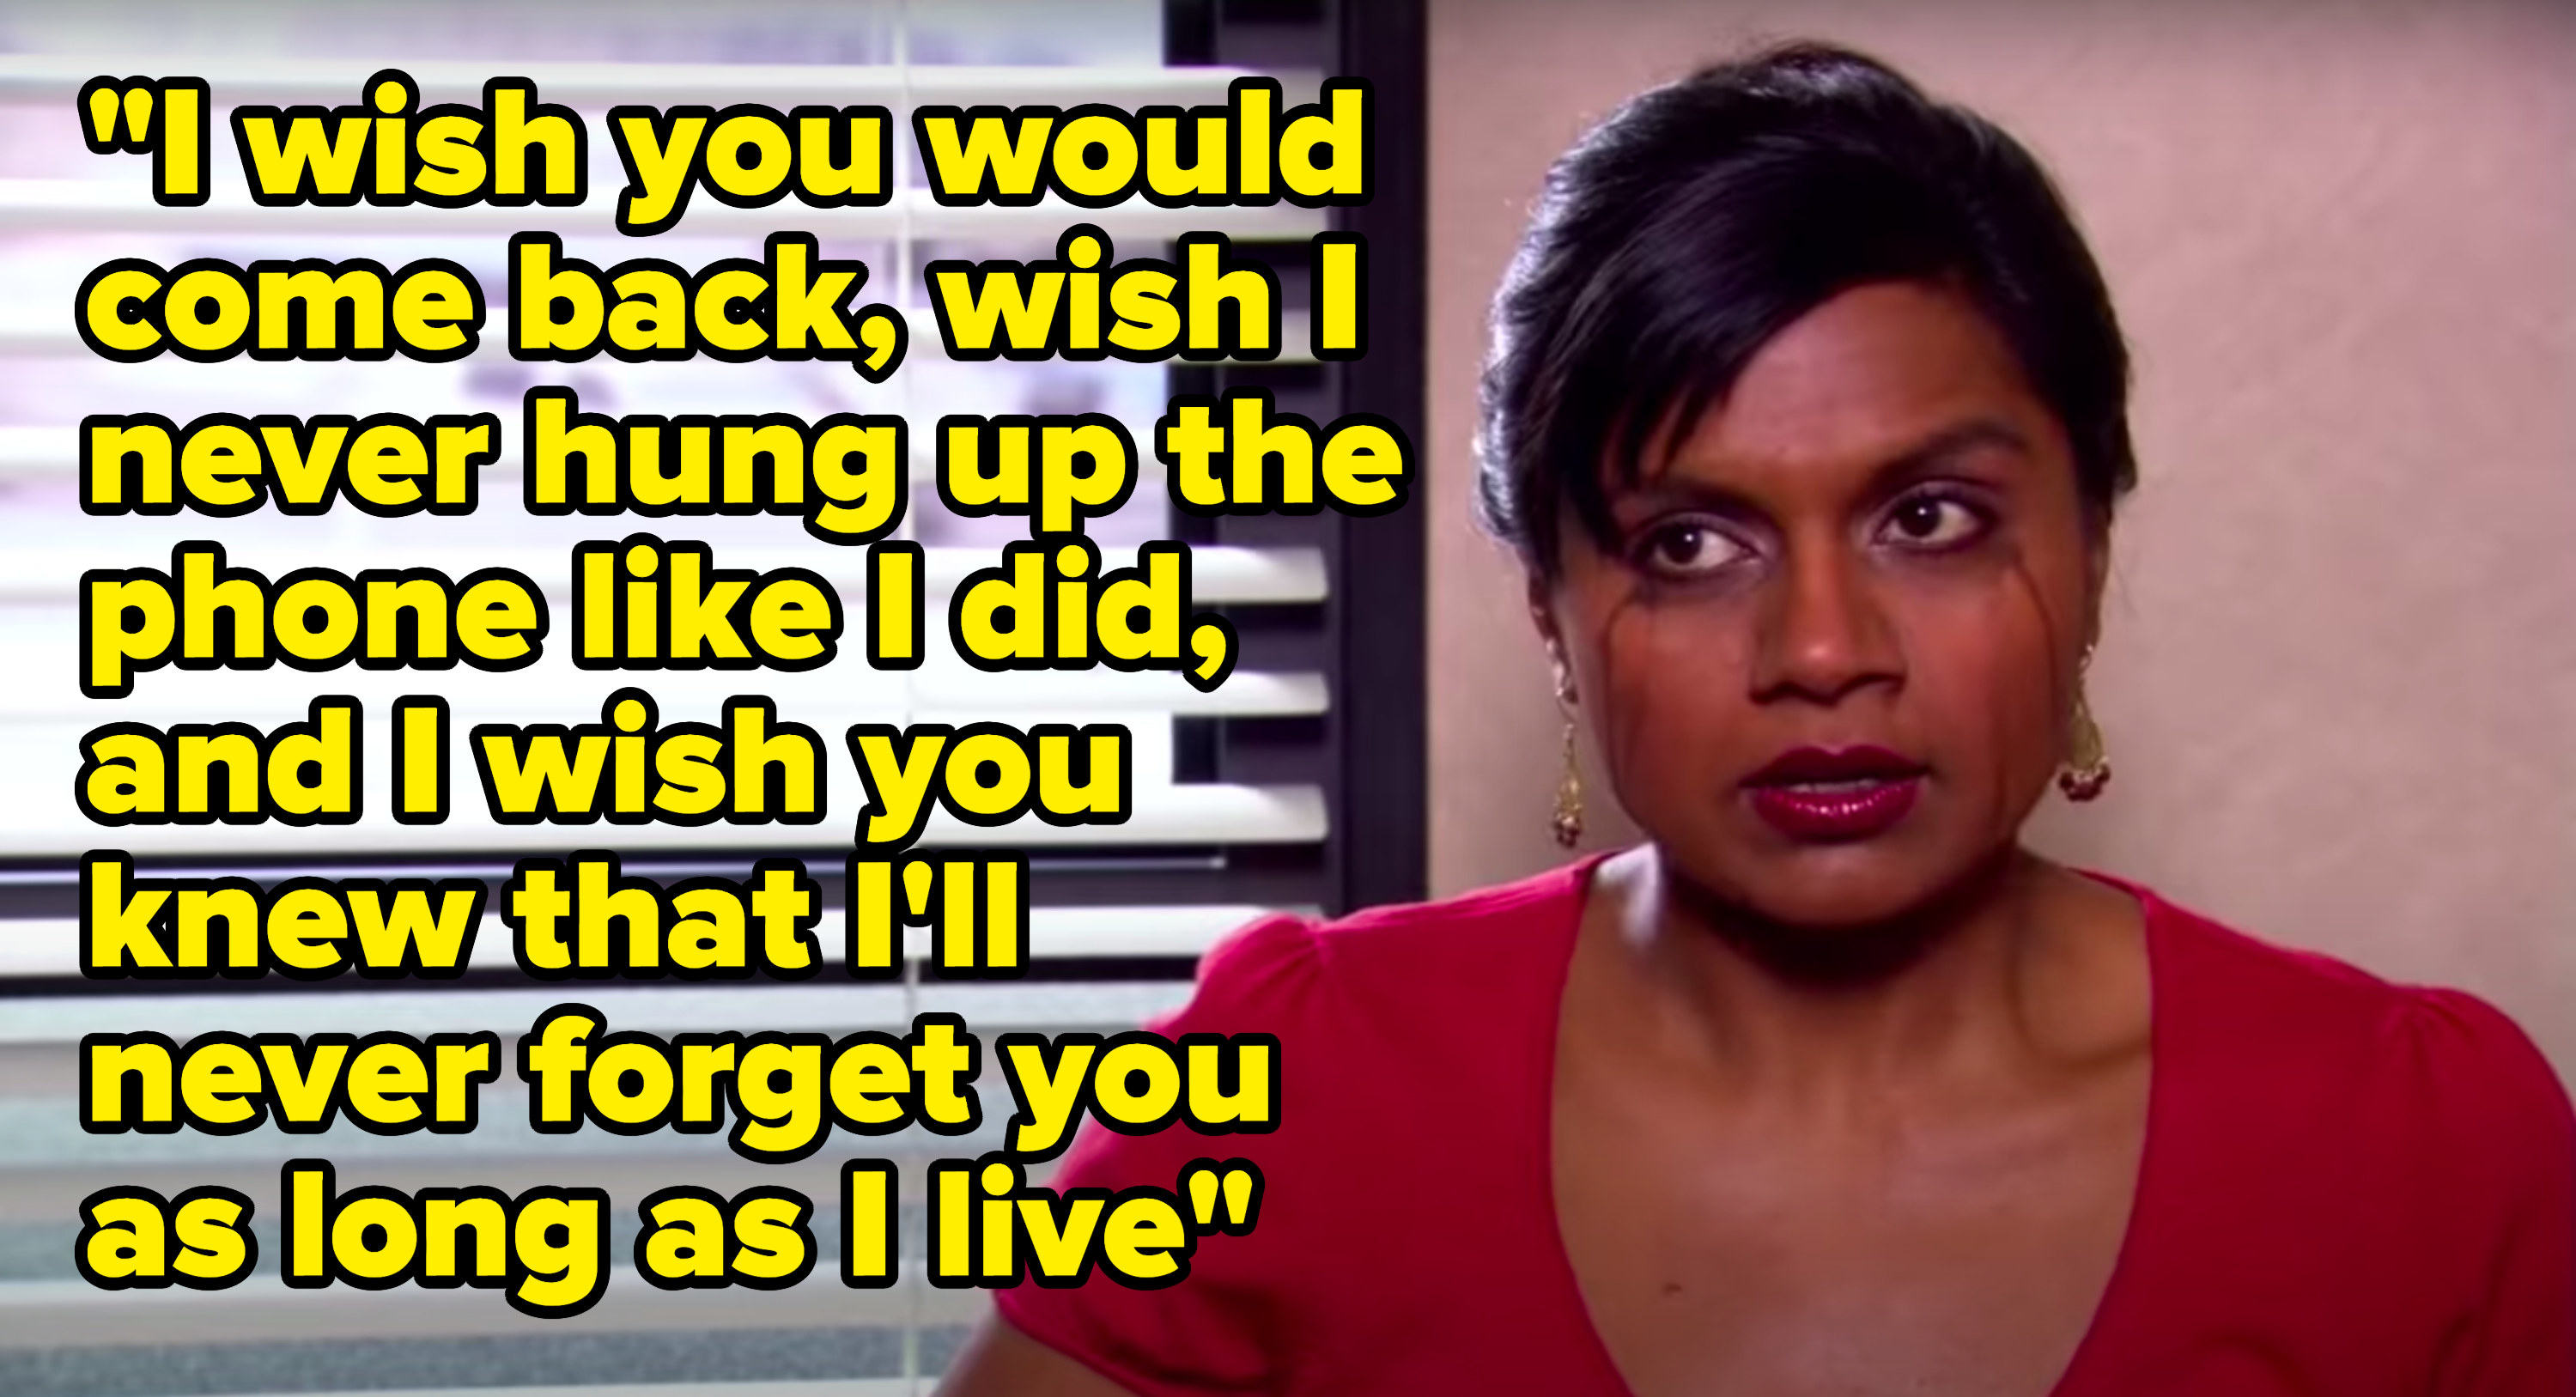 Kelly Kapoor from The Office cries next to the lyrics, &quot;I wish you would come back, wish I never hung up the phone like I did, and I wish you knew that I&#x27;ll never forget you as long as I live&quot;